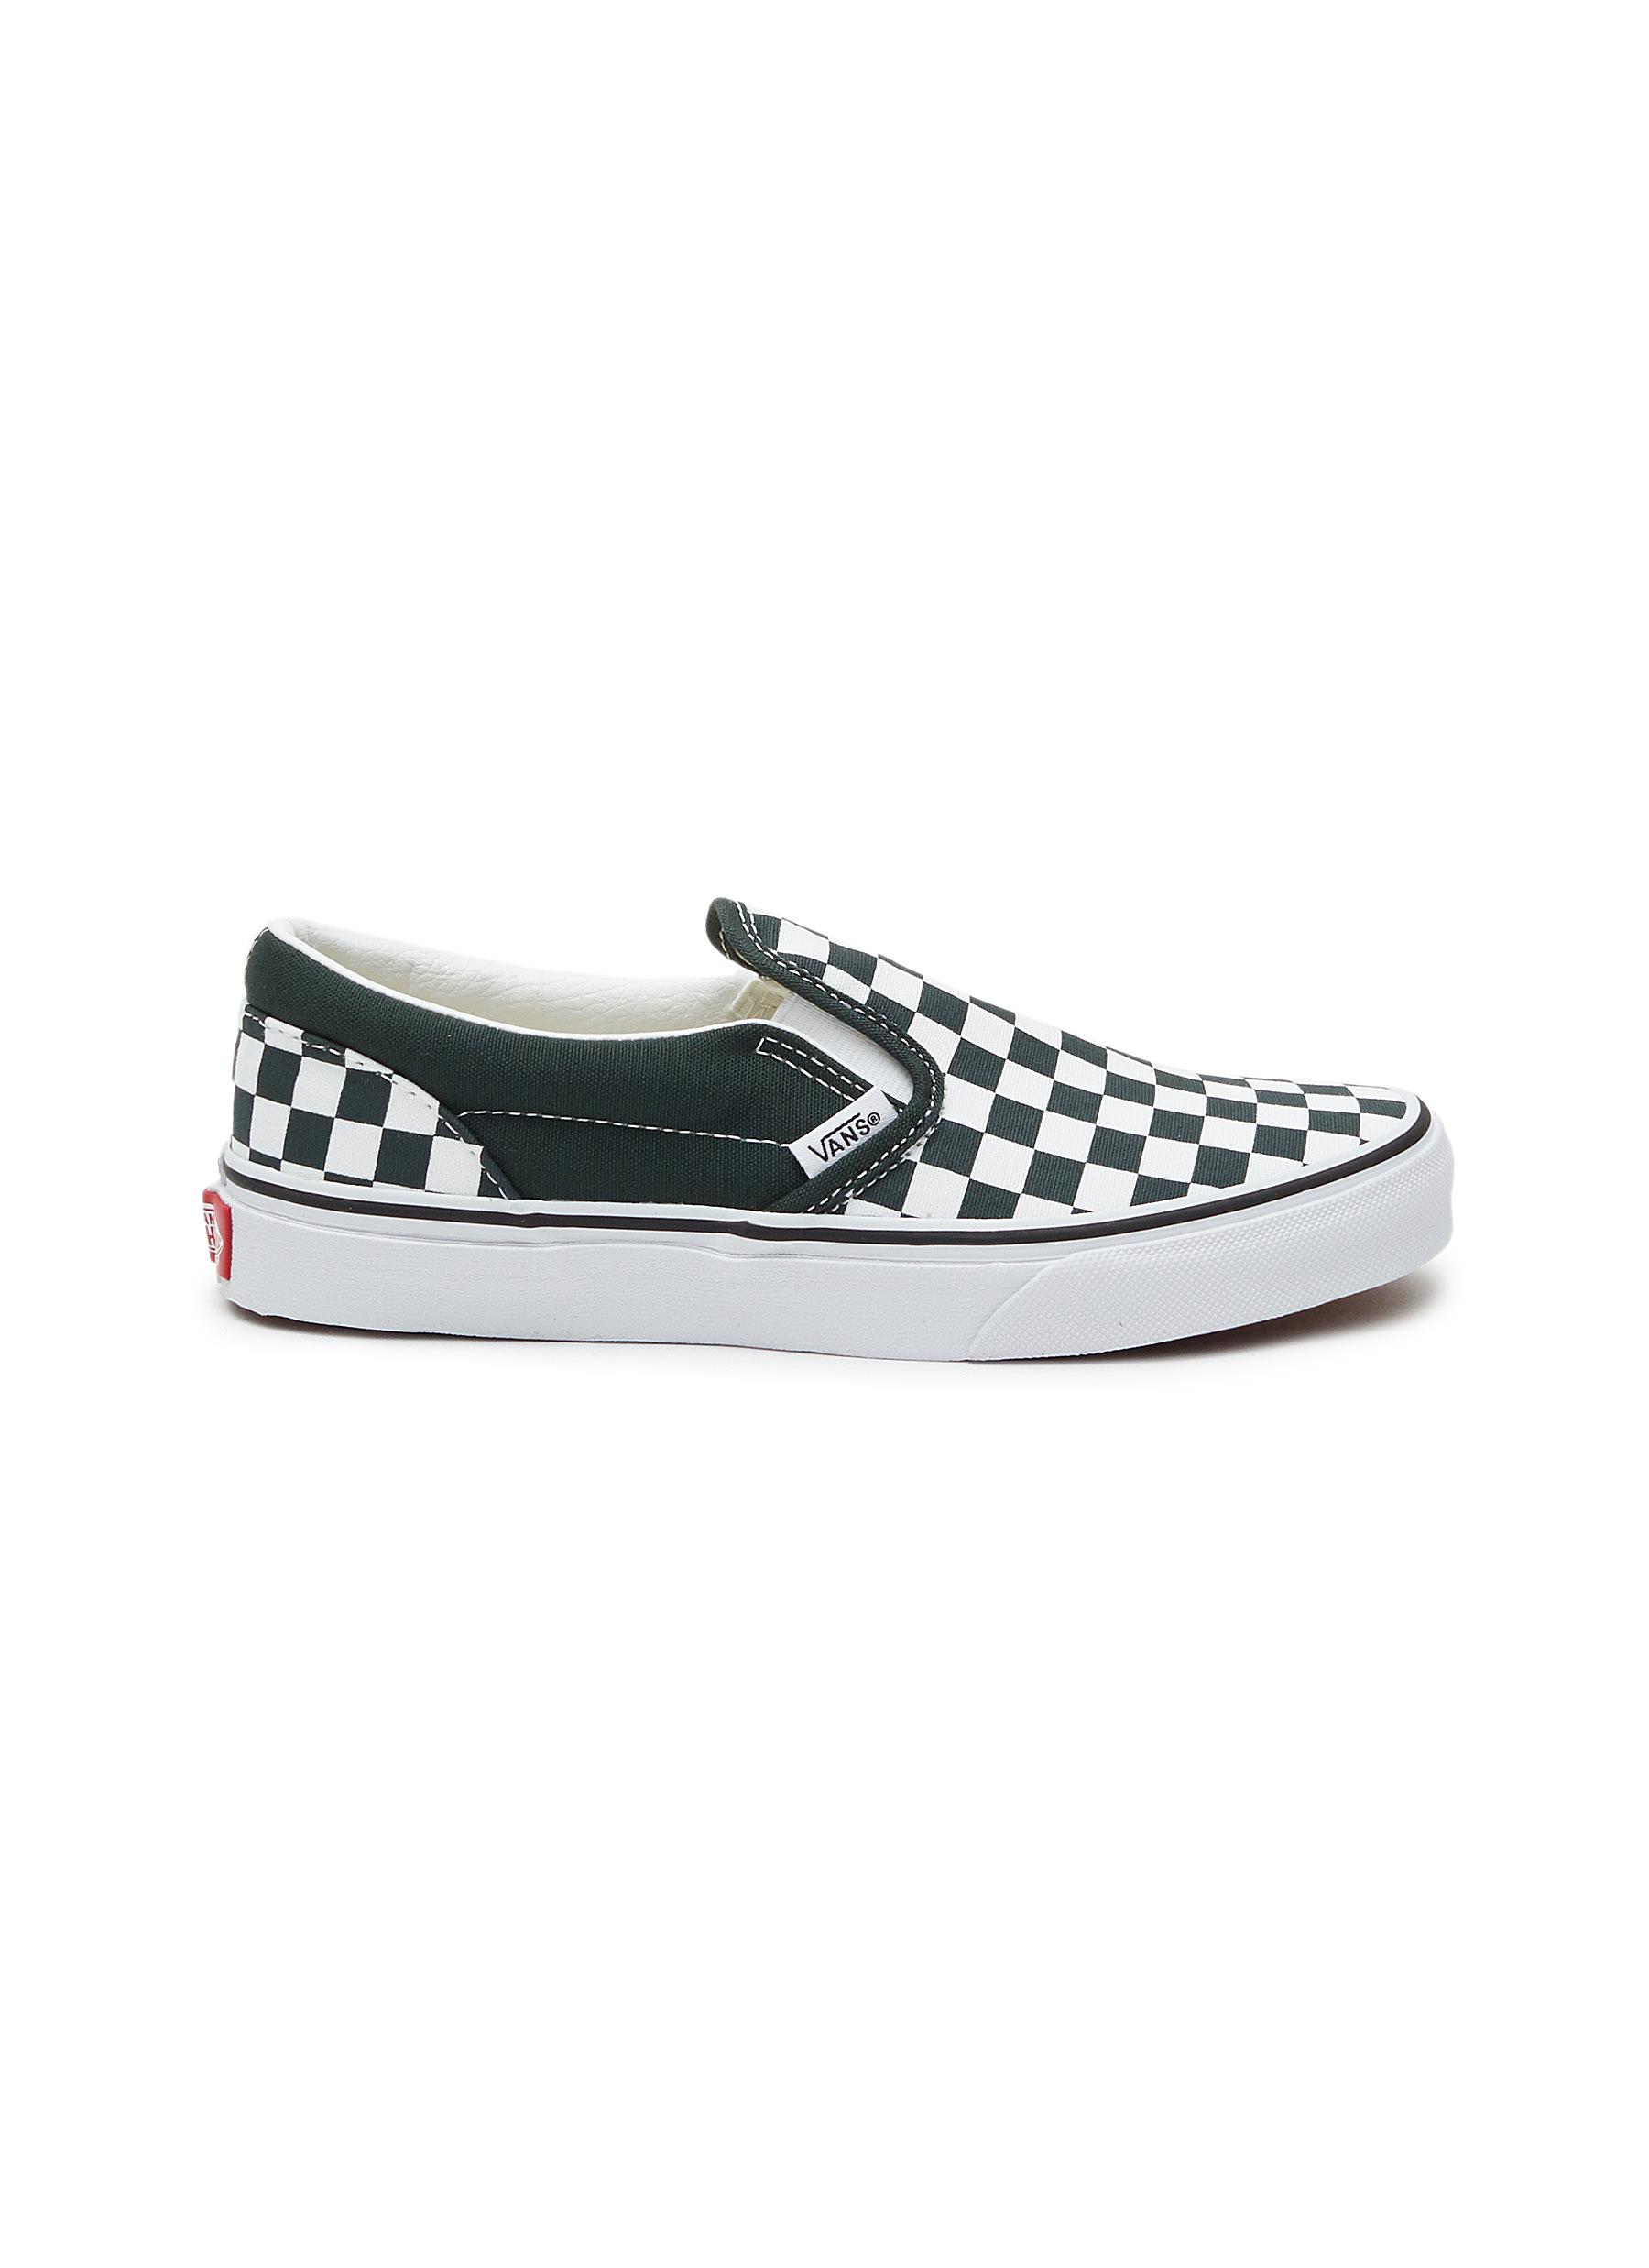 TOP CHECKERBOARD CANVAS KIDS SNEAKERS 